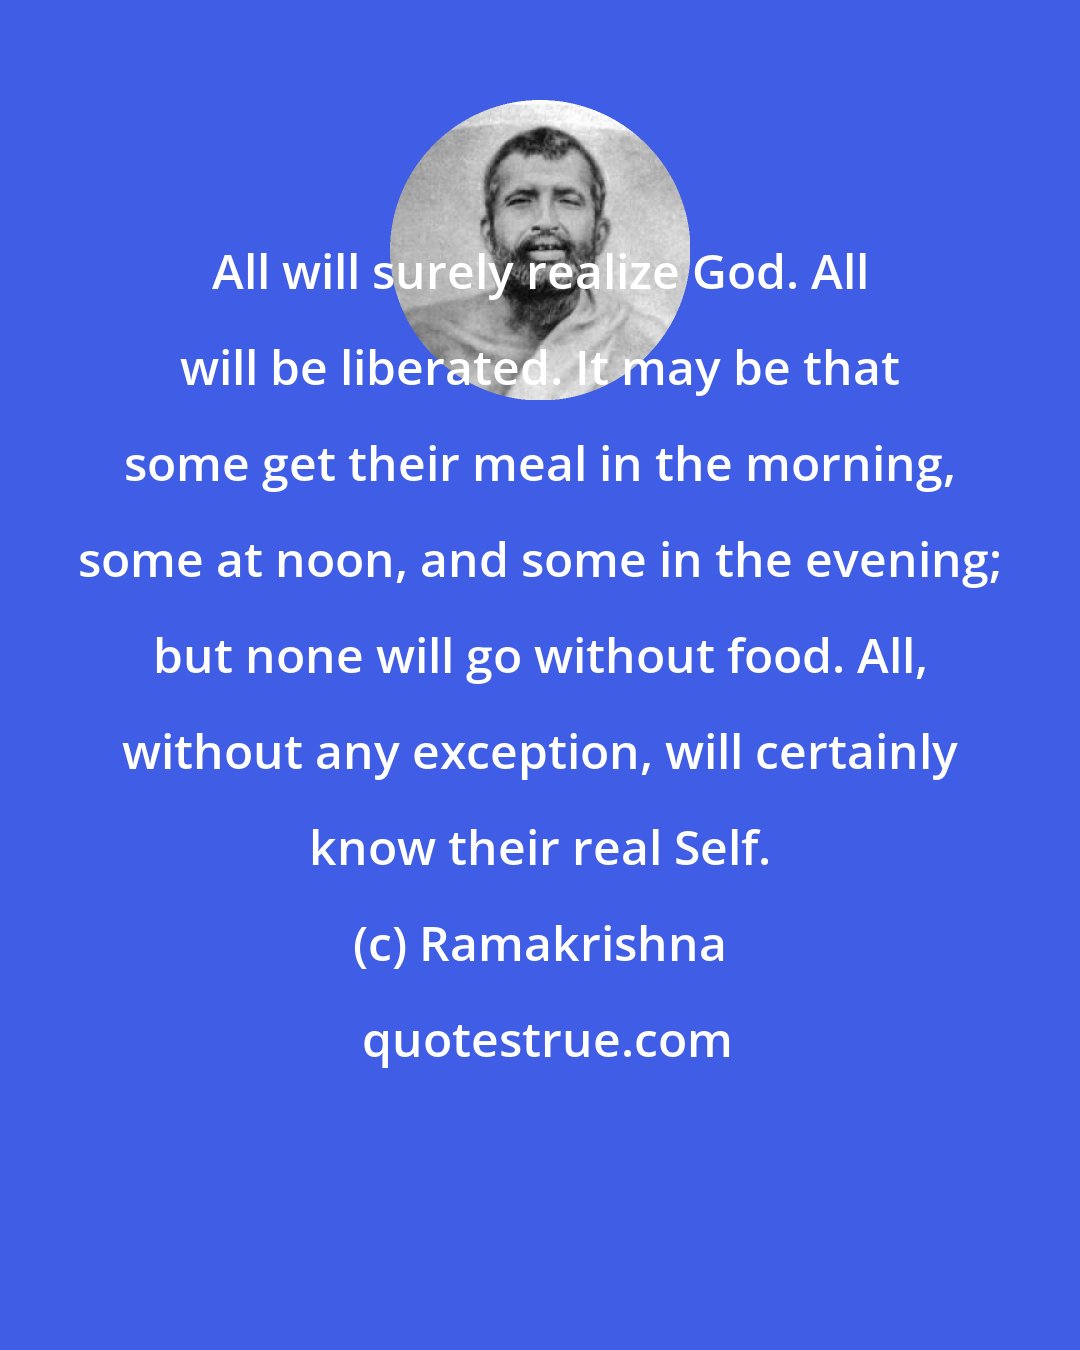 Ramakrishna: All will surely realize God. All will be liberated. It may be that some get their meal in the morning, some at noon, and some in the evening; but none will go without food. All, without any exception, will certainly know their real Self.